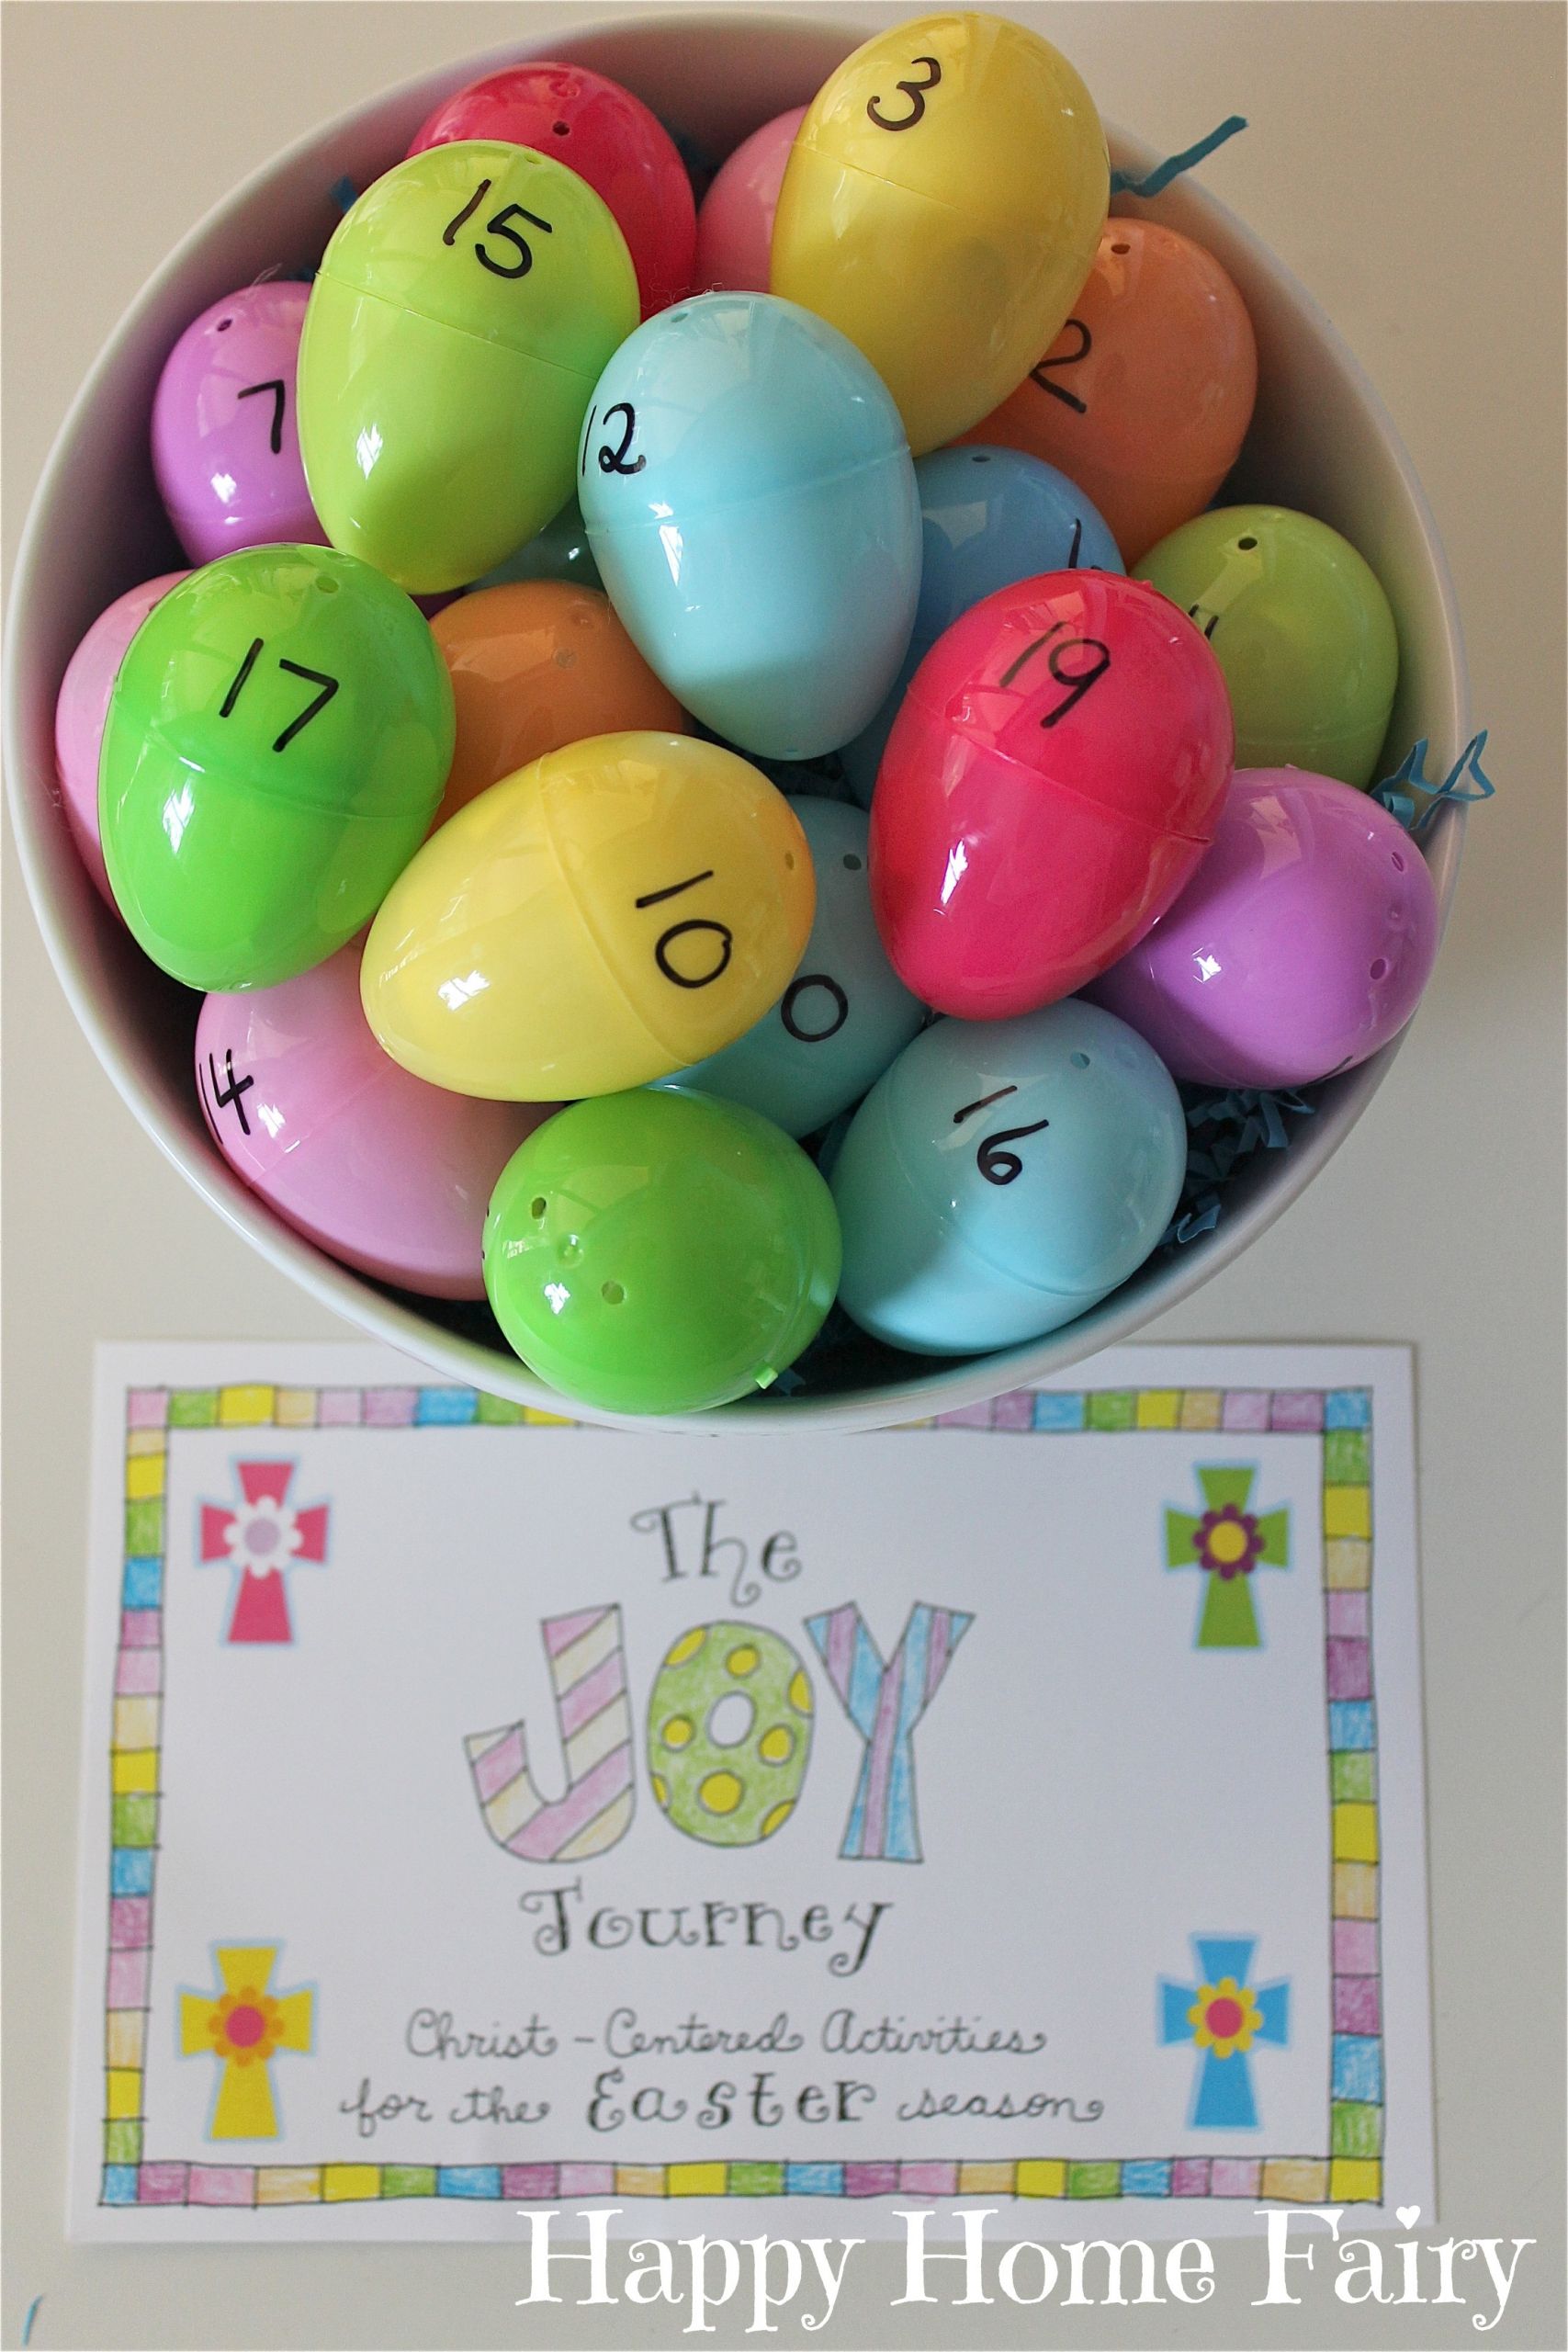 Fun Ideas For Easter
 The Joy Journey Christ Centered Easter Activities FREE